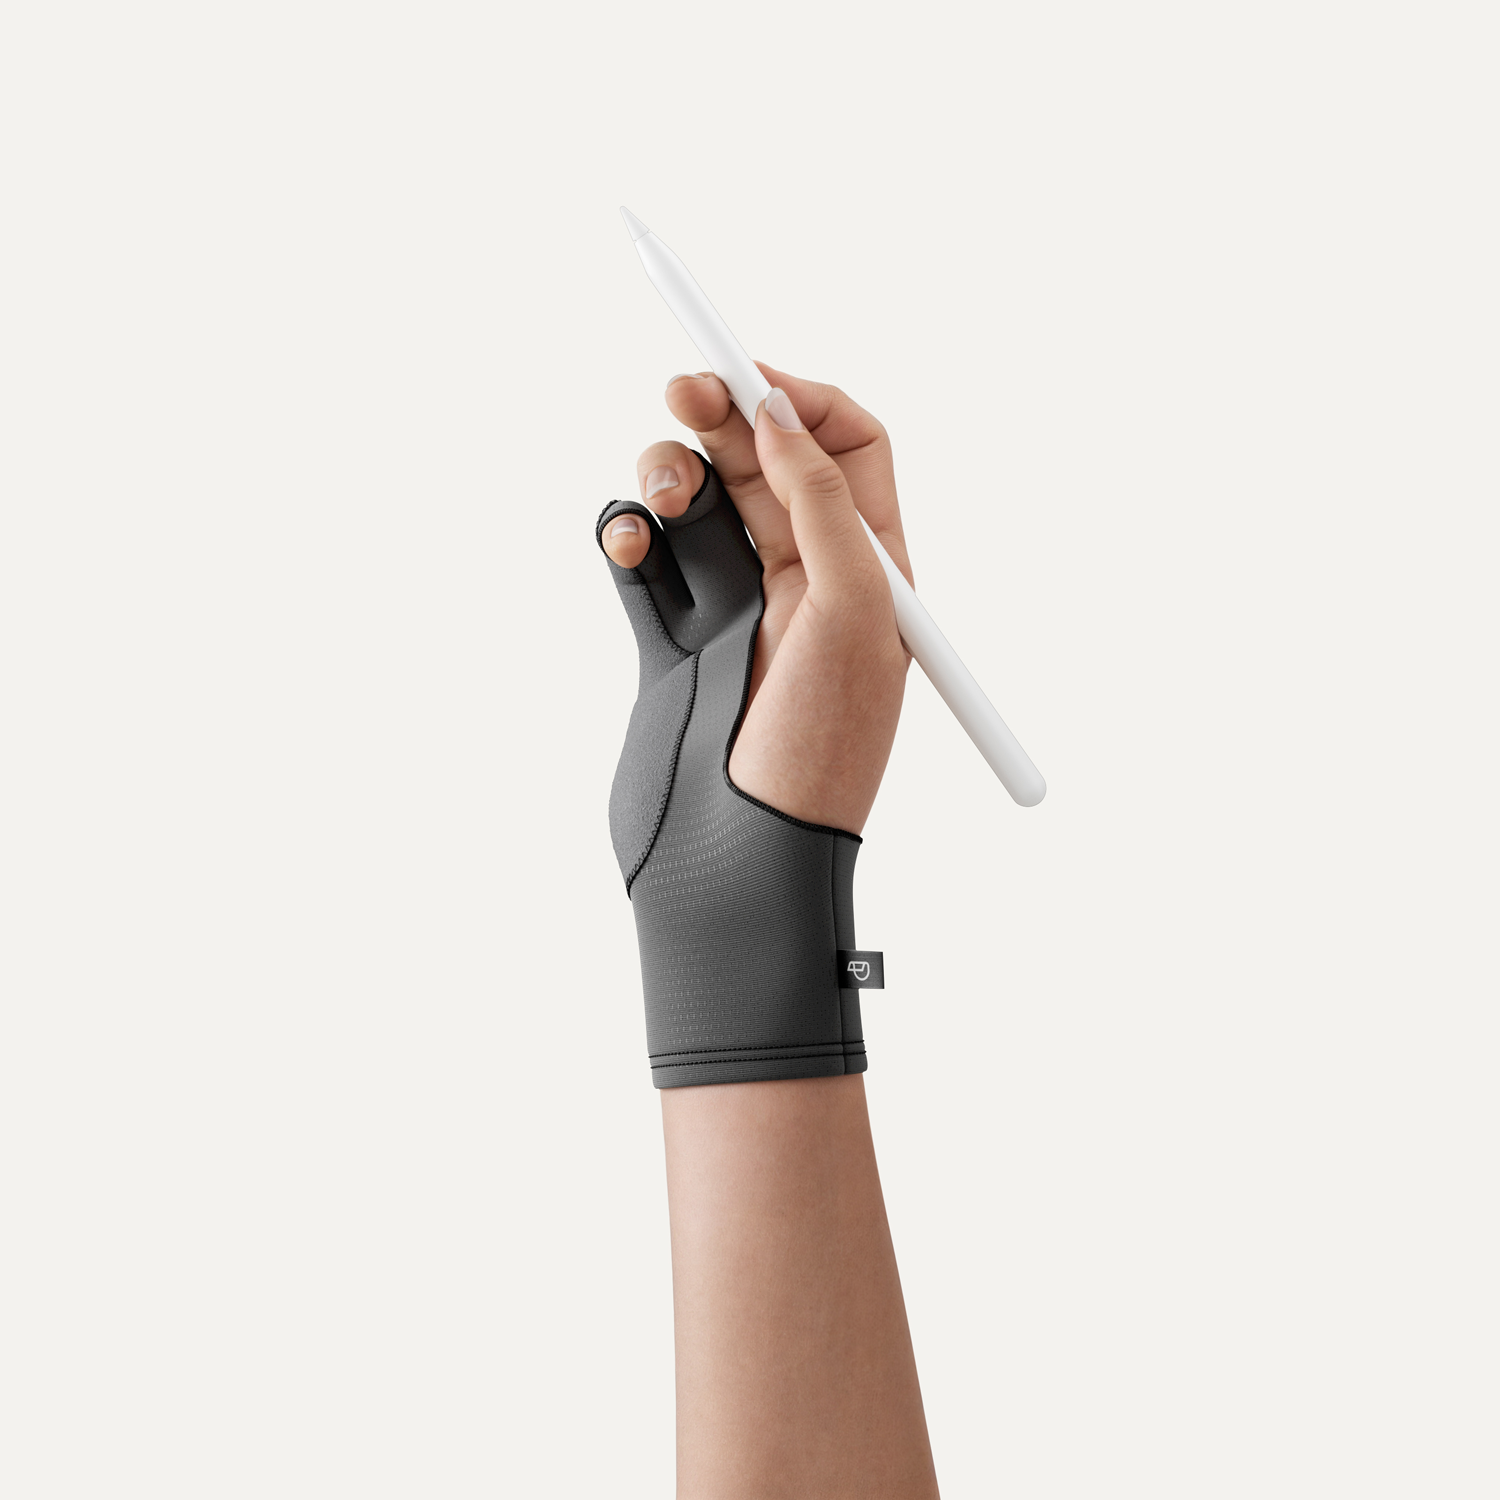 Paperlike's Fingerless Drawing glove made for drawing and notetaking on your iPad